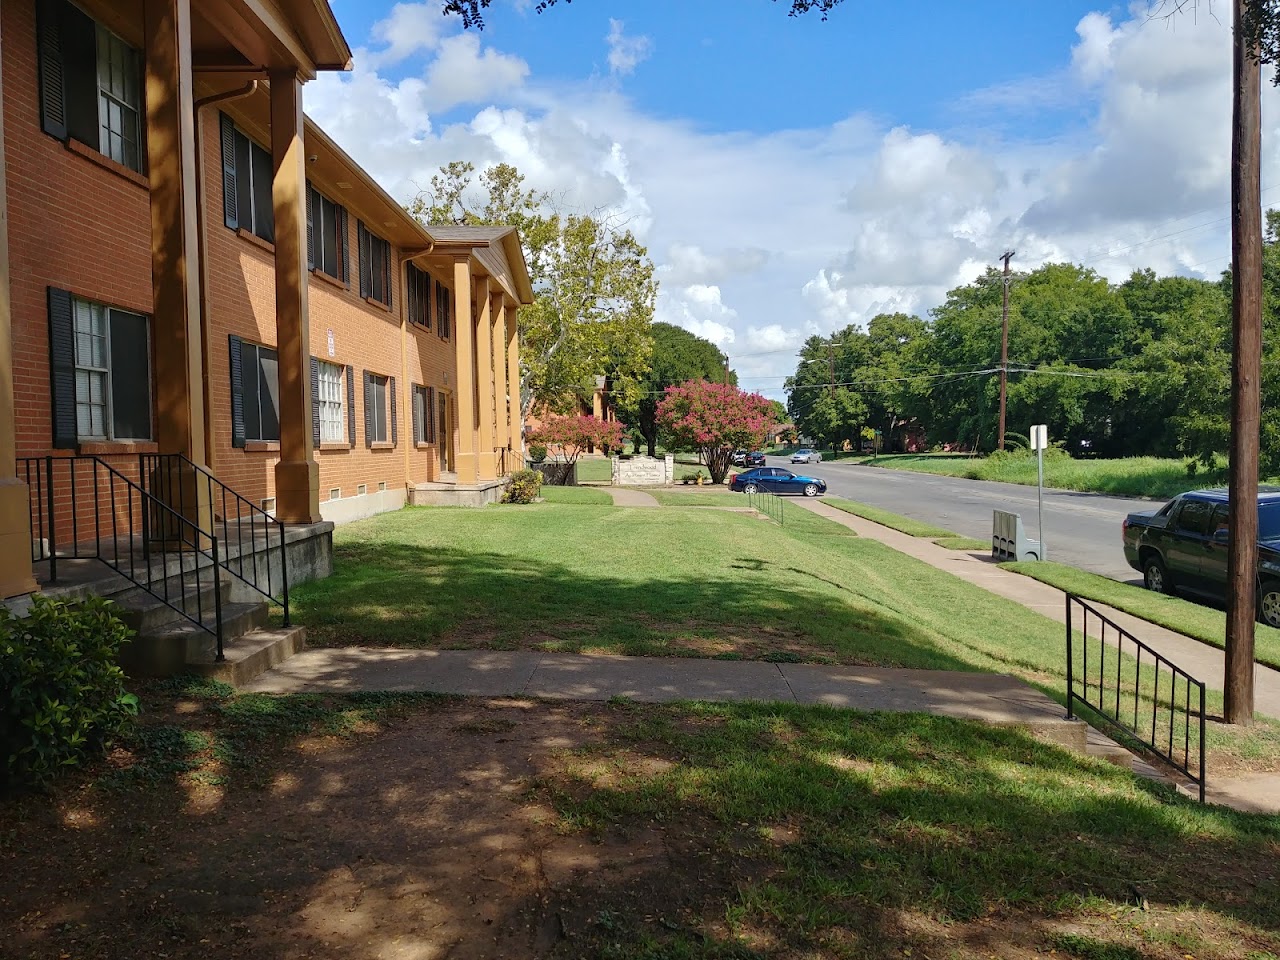 Photo of TRENDWOOD. Affordable housing located at 1700 DALLAS CIRCLE WACO, TX 76704